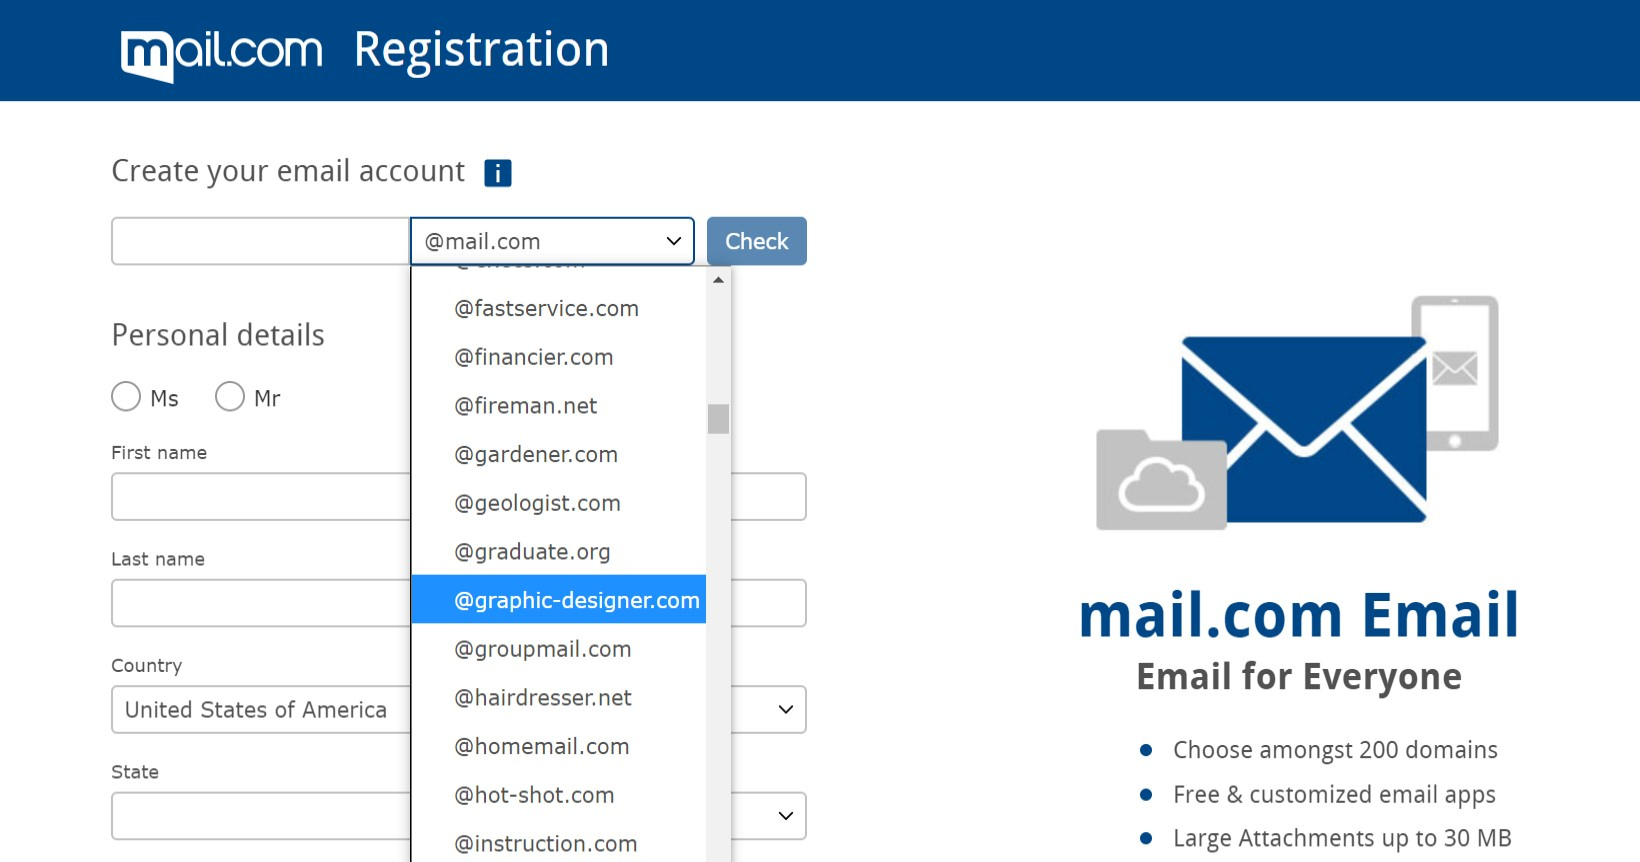 The Mail.com registration page.